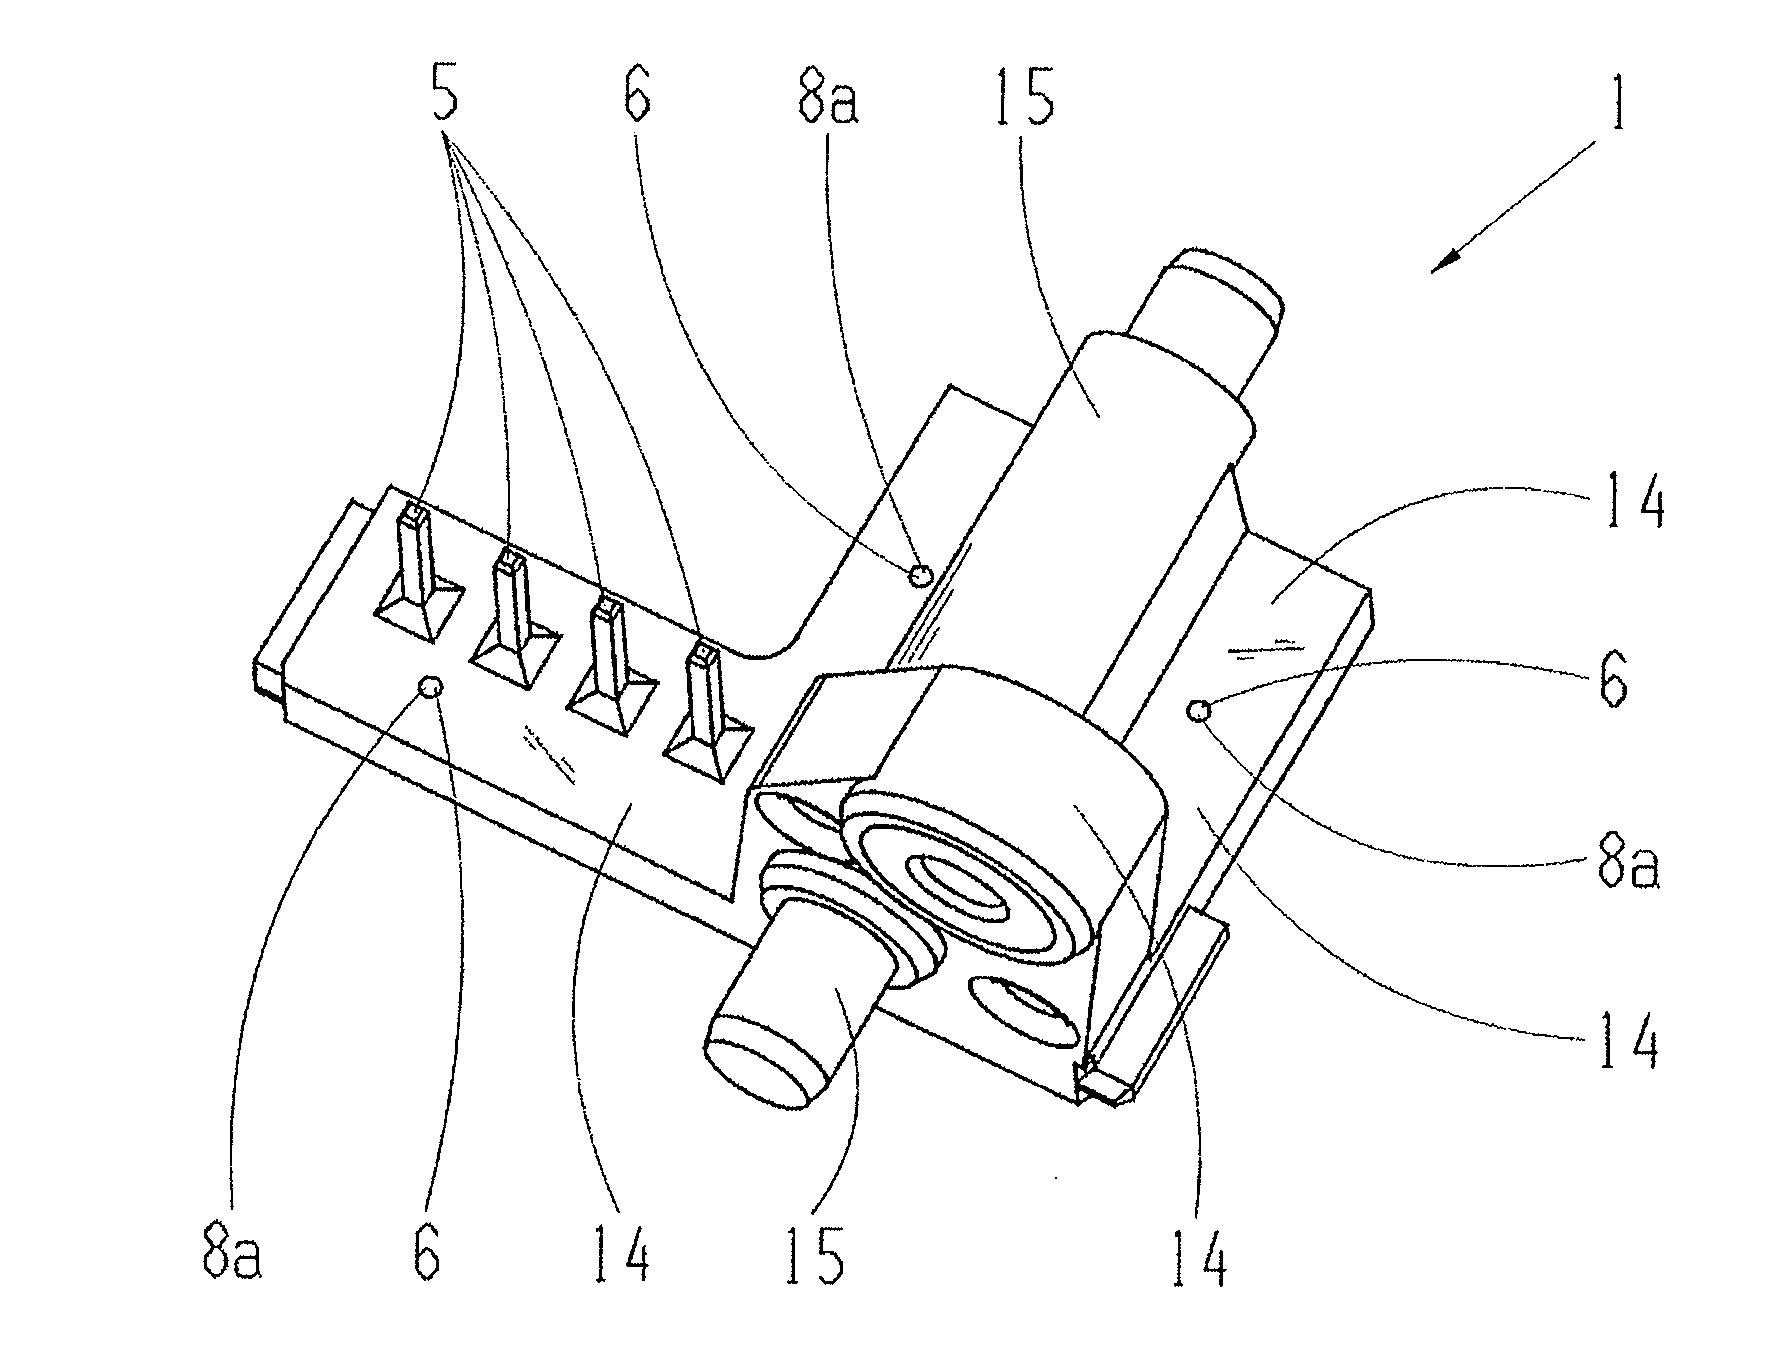 Method of manufacturing a molded sensor subassembly